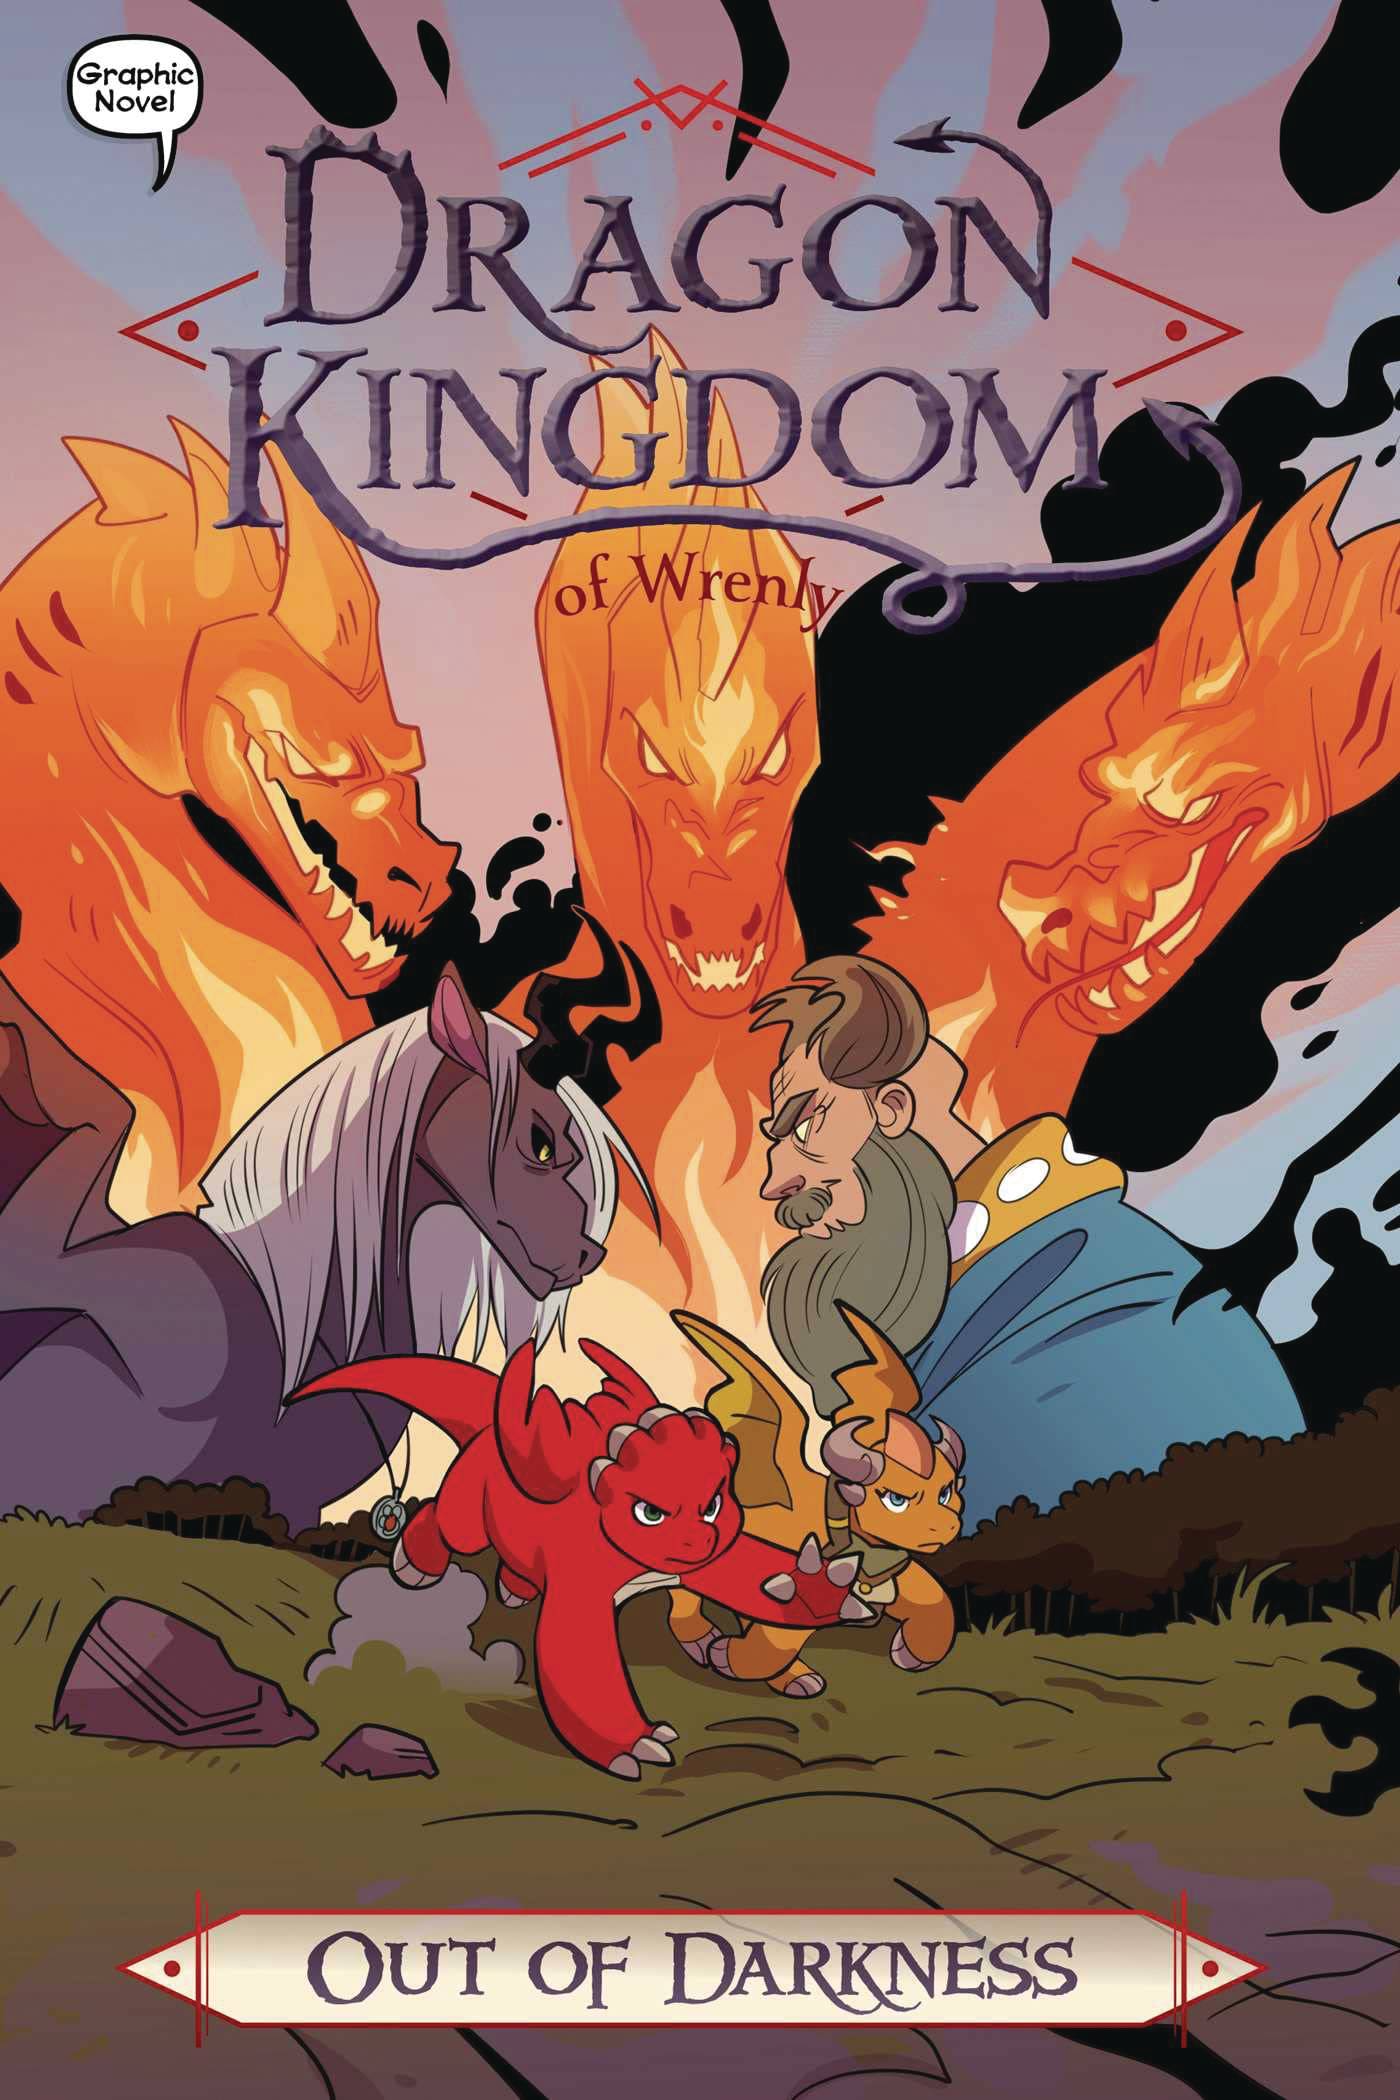 DRAGON KINGDOM OF WRENLY GN VOL 10 OUT OF DARKNESS